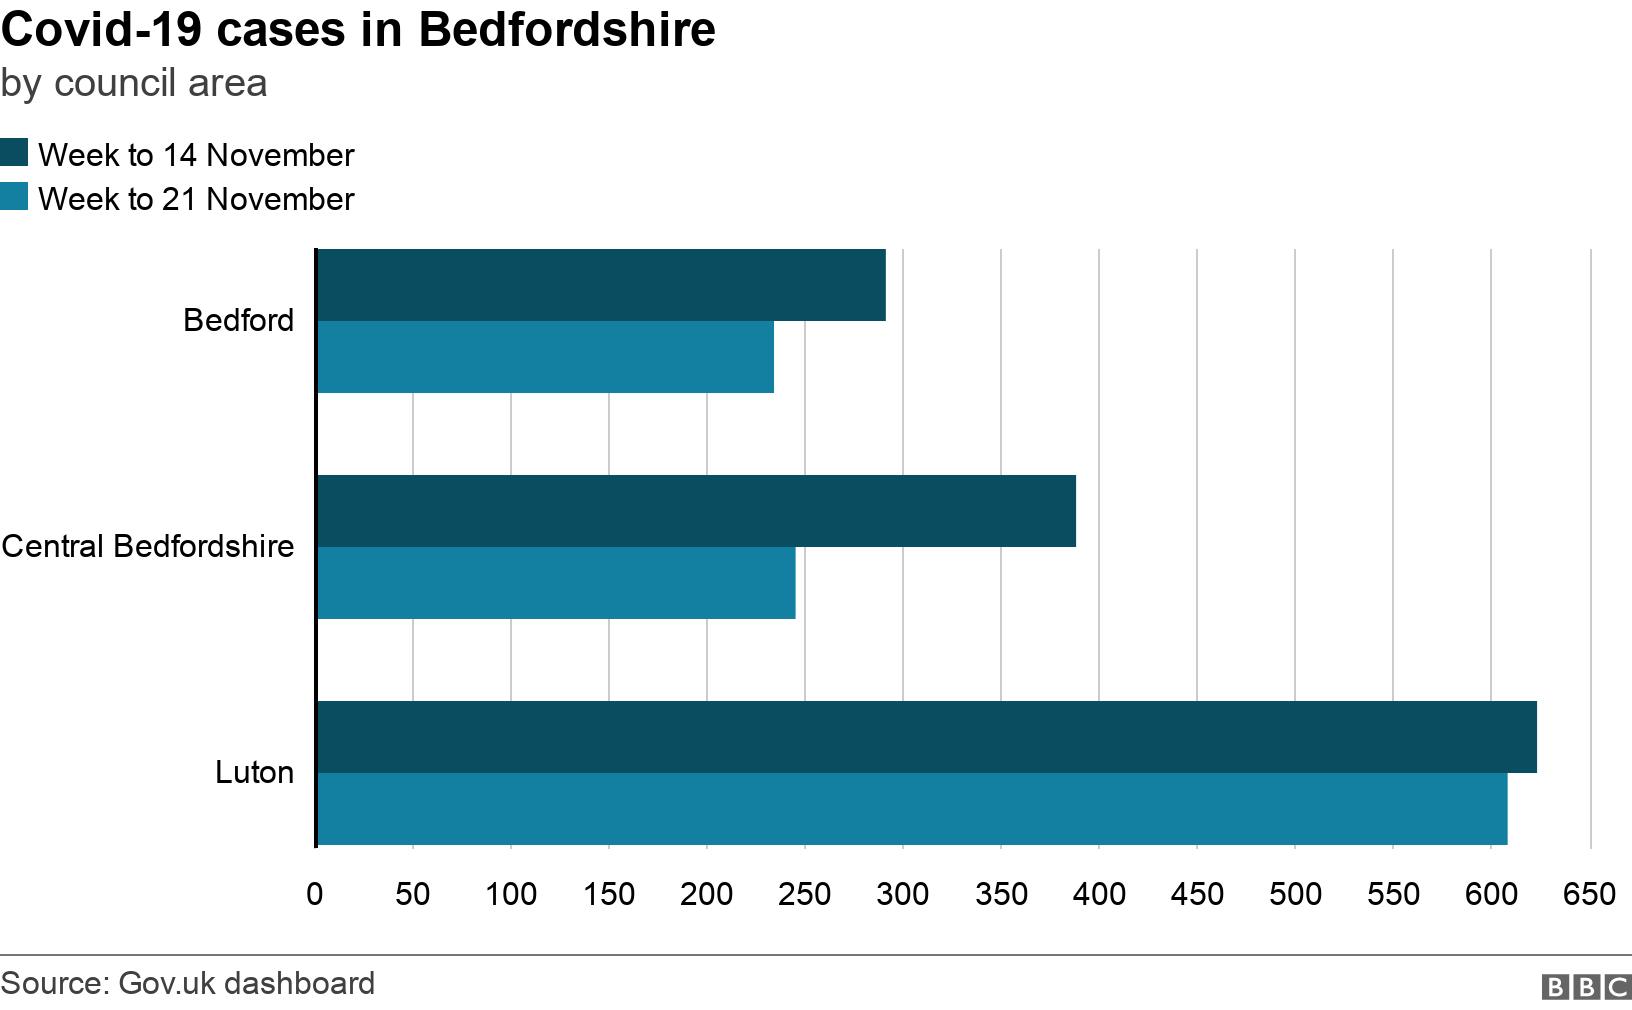 Covid-19 cases in Bedfordshire. by council area. Number of Covid-19 cases in Bedfordshire by council area .